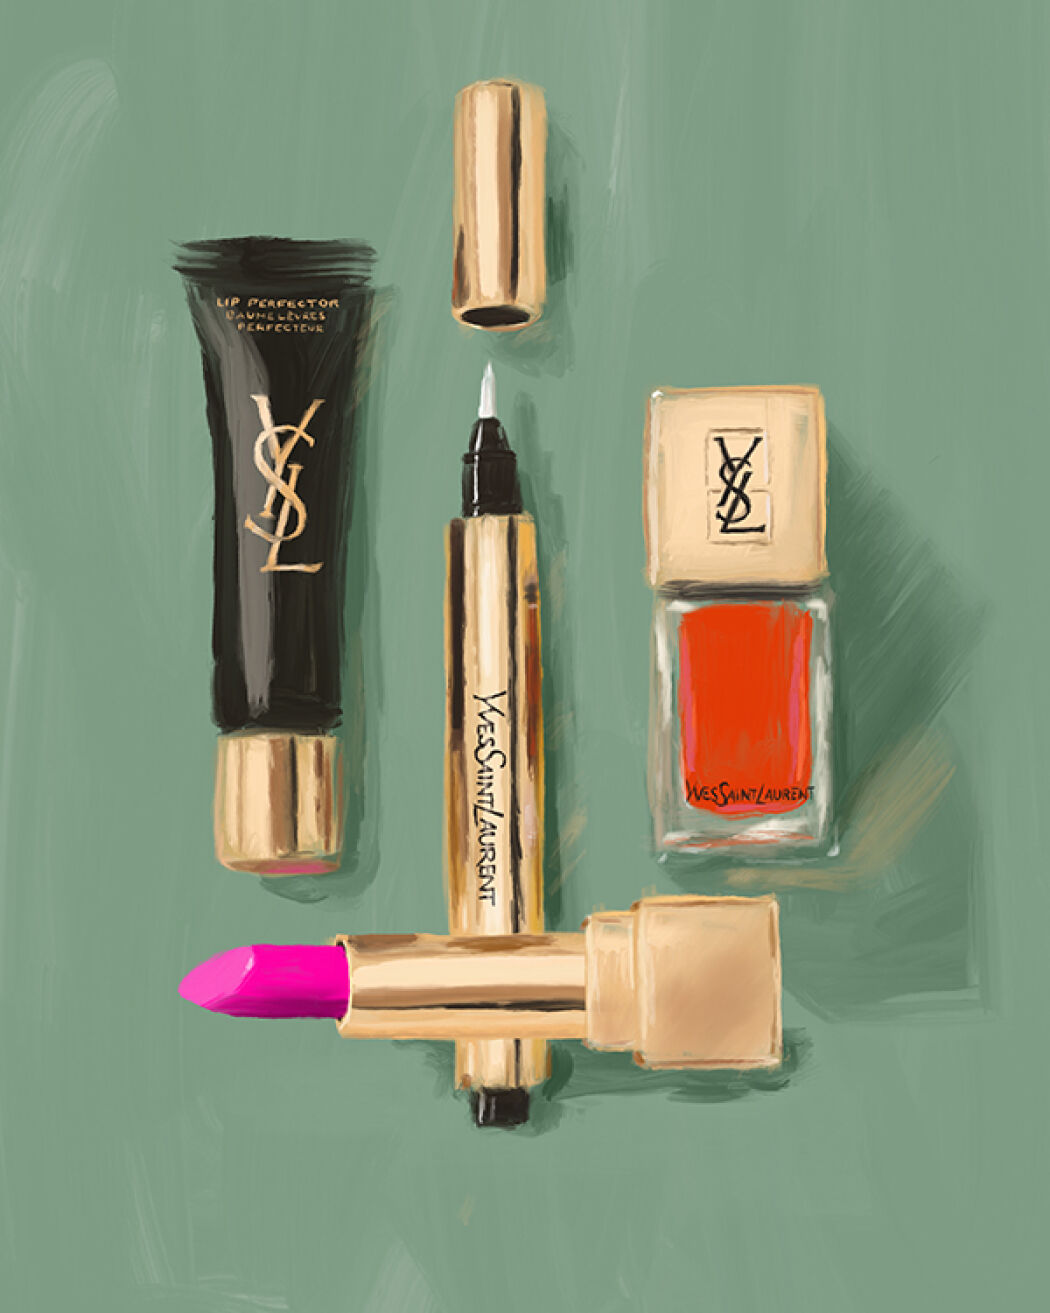 Beauty and Make up illustrations for YSL Beauty by Christina Gliha